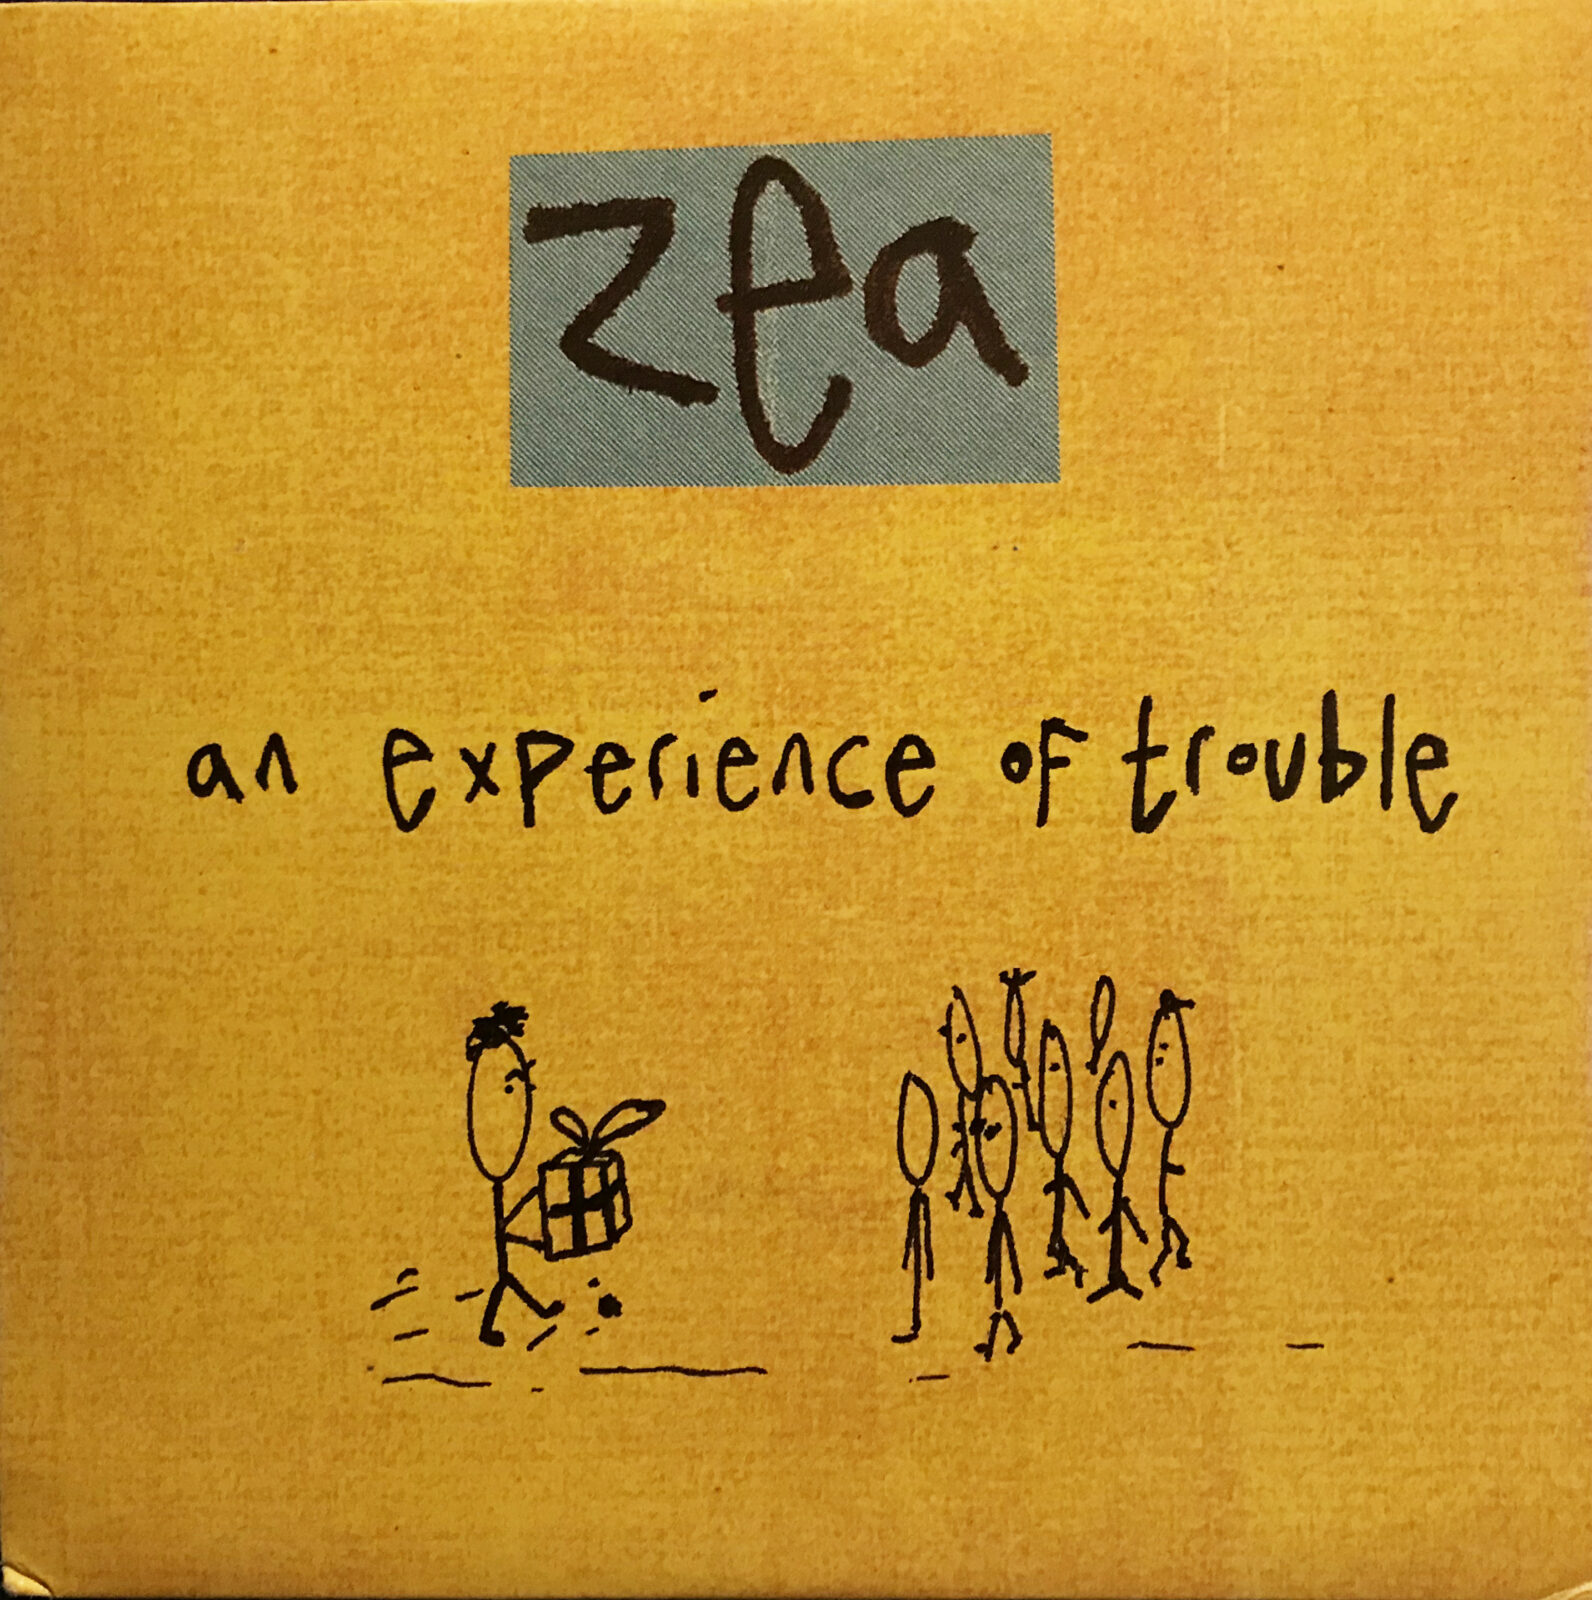 Zea - An experience of trouble